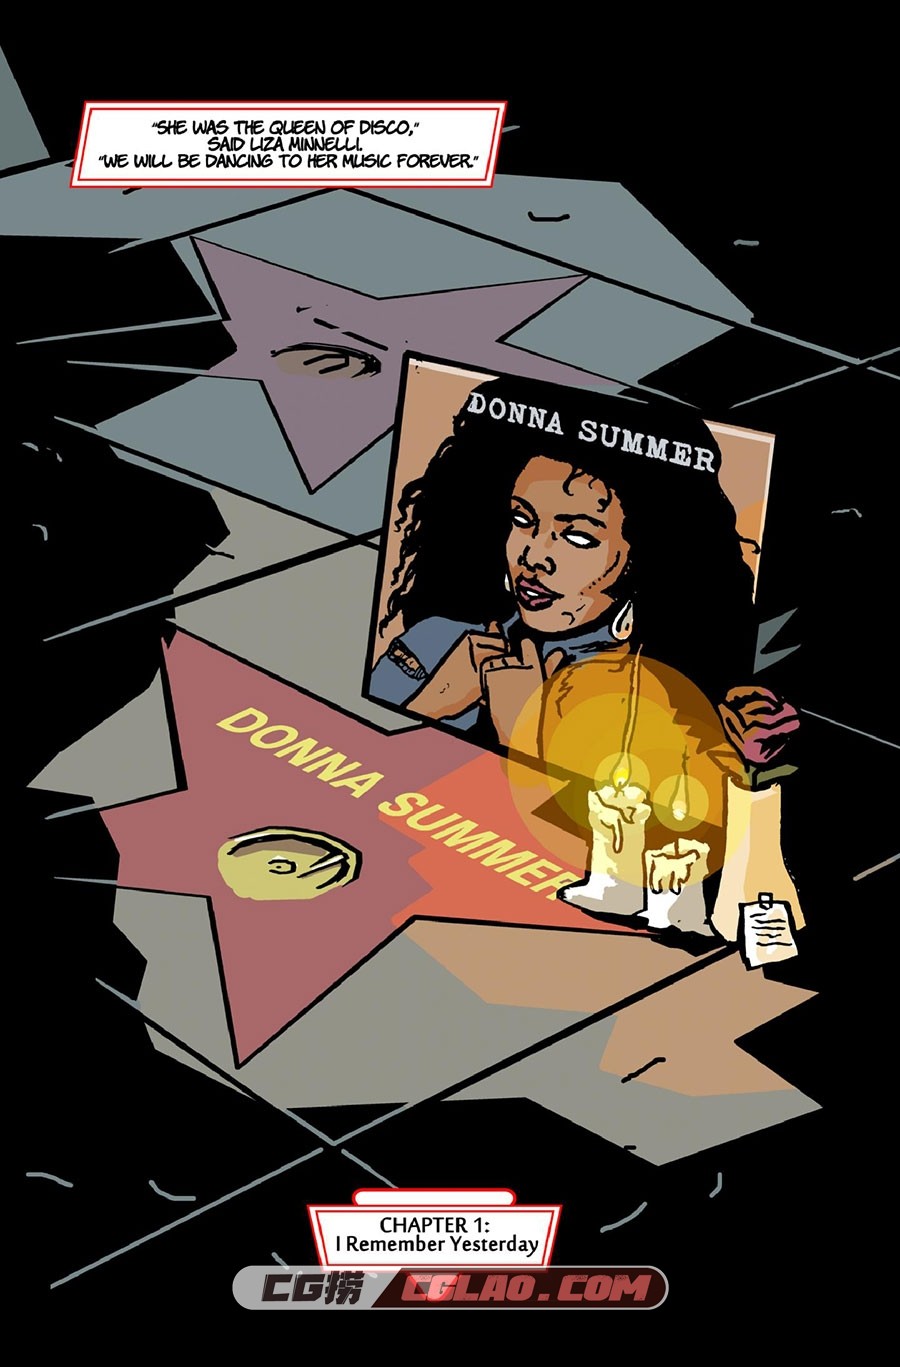 TidalWave Productions Tribute Donna Summer 2022 Hybrid Comic eBook 漫画,bb-tribute.donna.summer0002.jpg